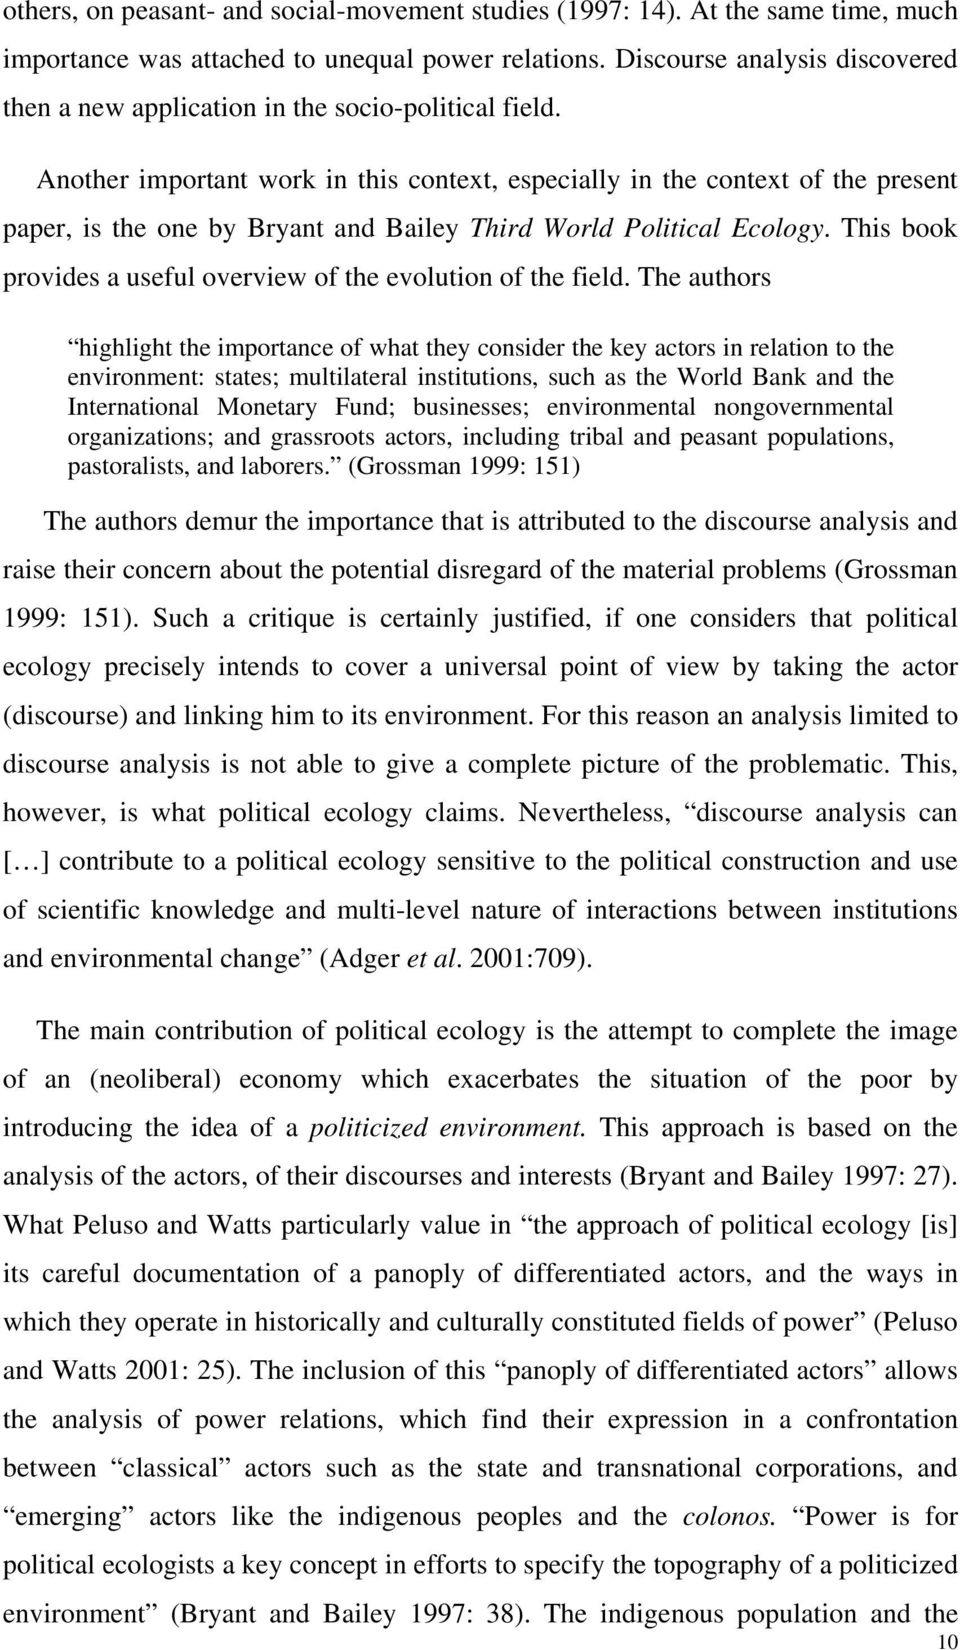 Another important work in this context, especially in the context of the present paper, is the one by Bryant and Bailey Third World Political Ecology.